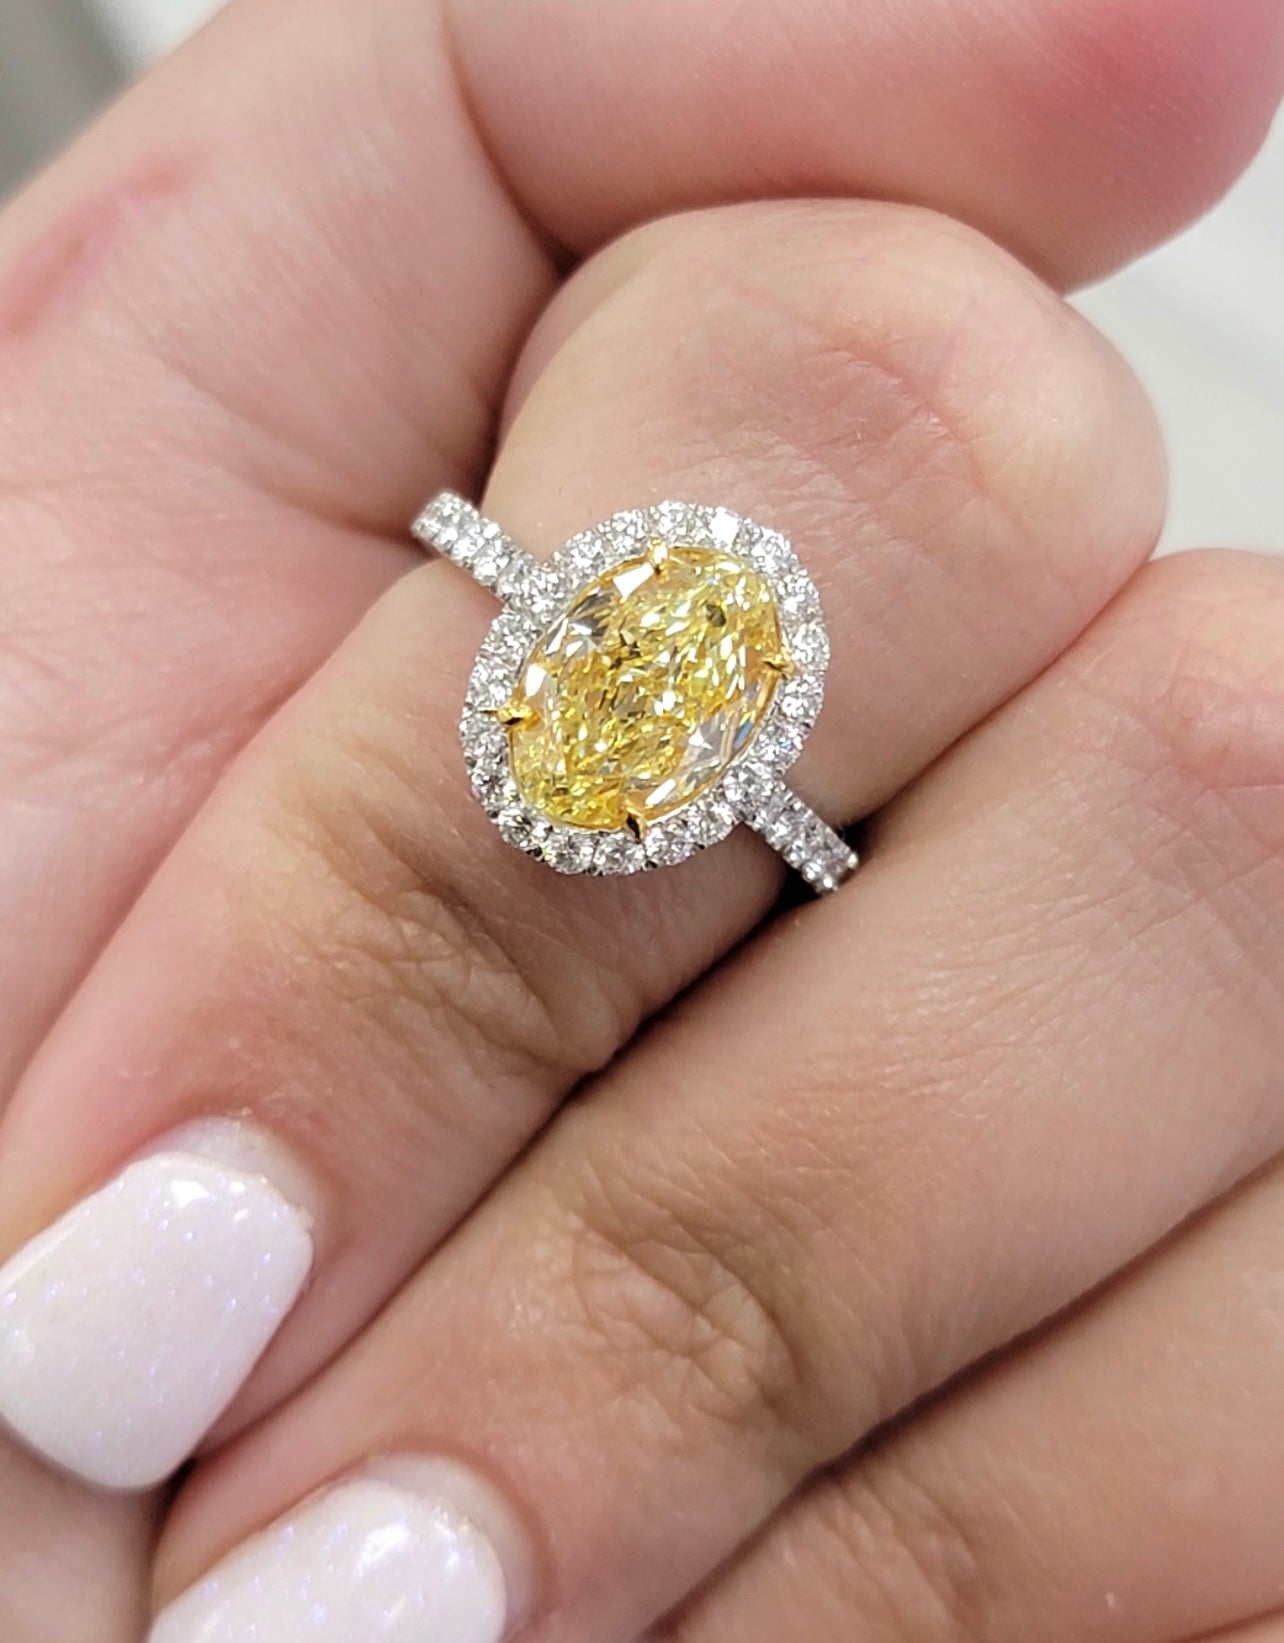 2.73ct Fancy Yellow Oval SI1 GIA Ring